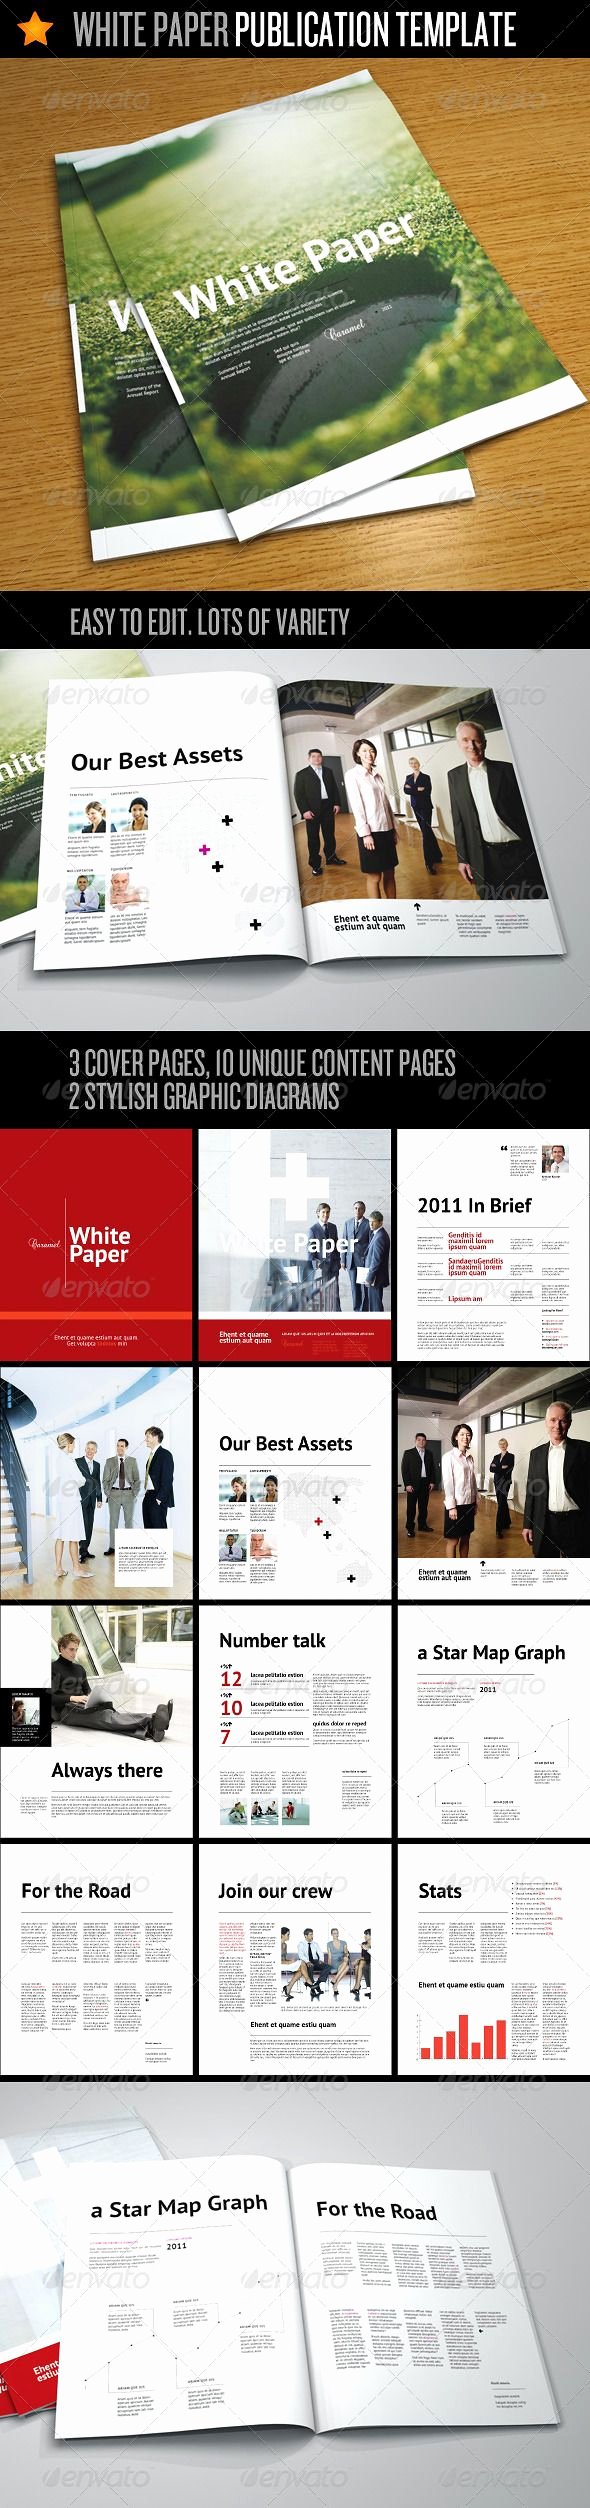 White Paper Template Indesign New 1000 Images About Print Templates On Pinterest